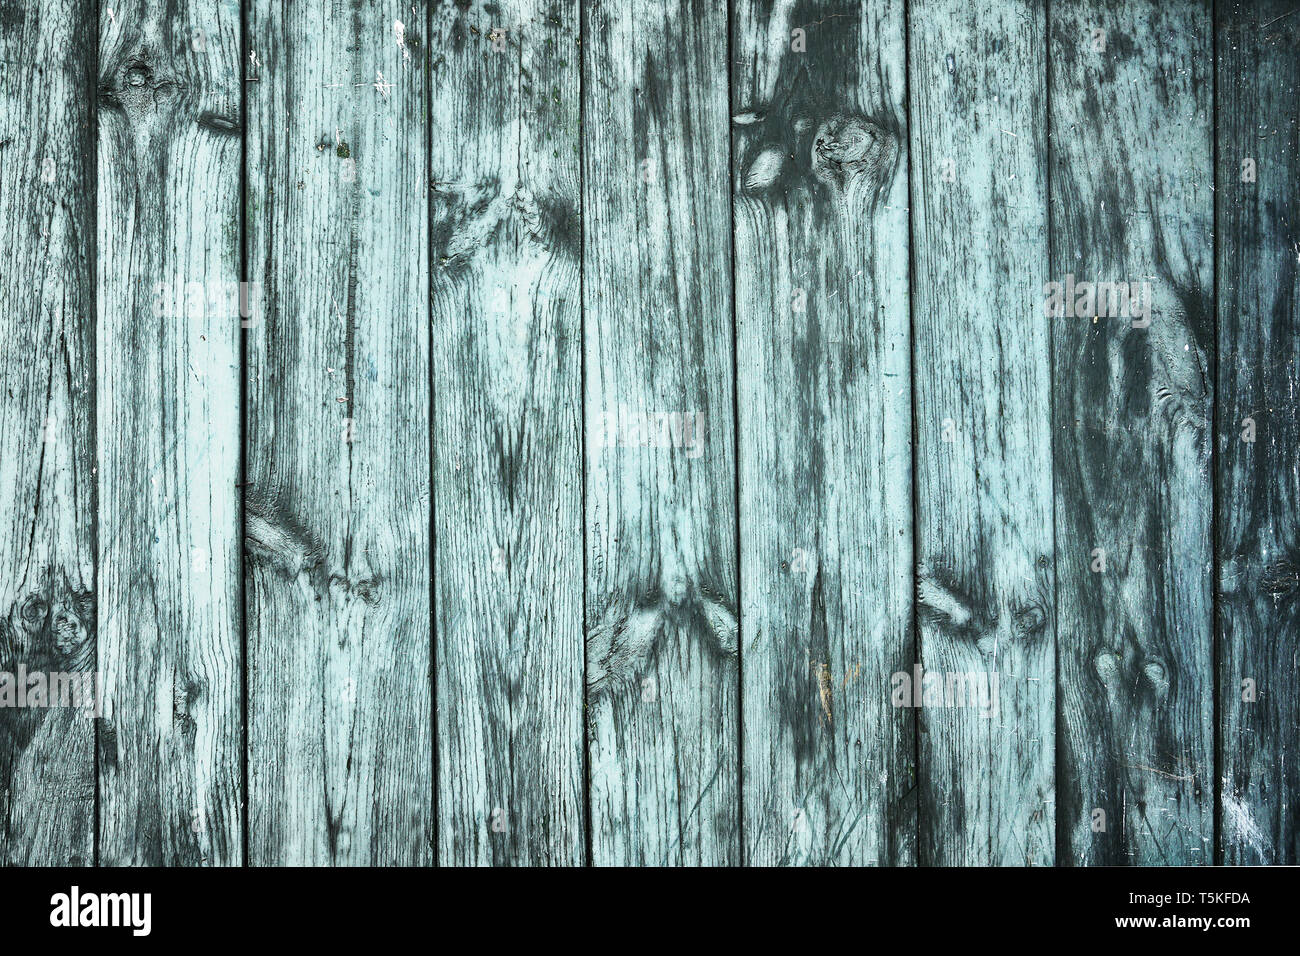 grungy paint layer on wooden surface, weathered green wooden planks Stock Photo